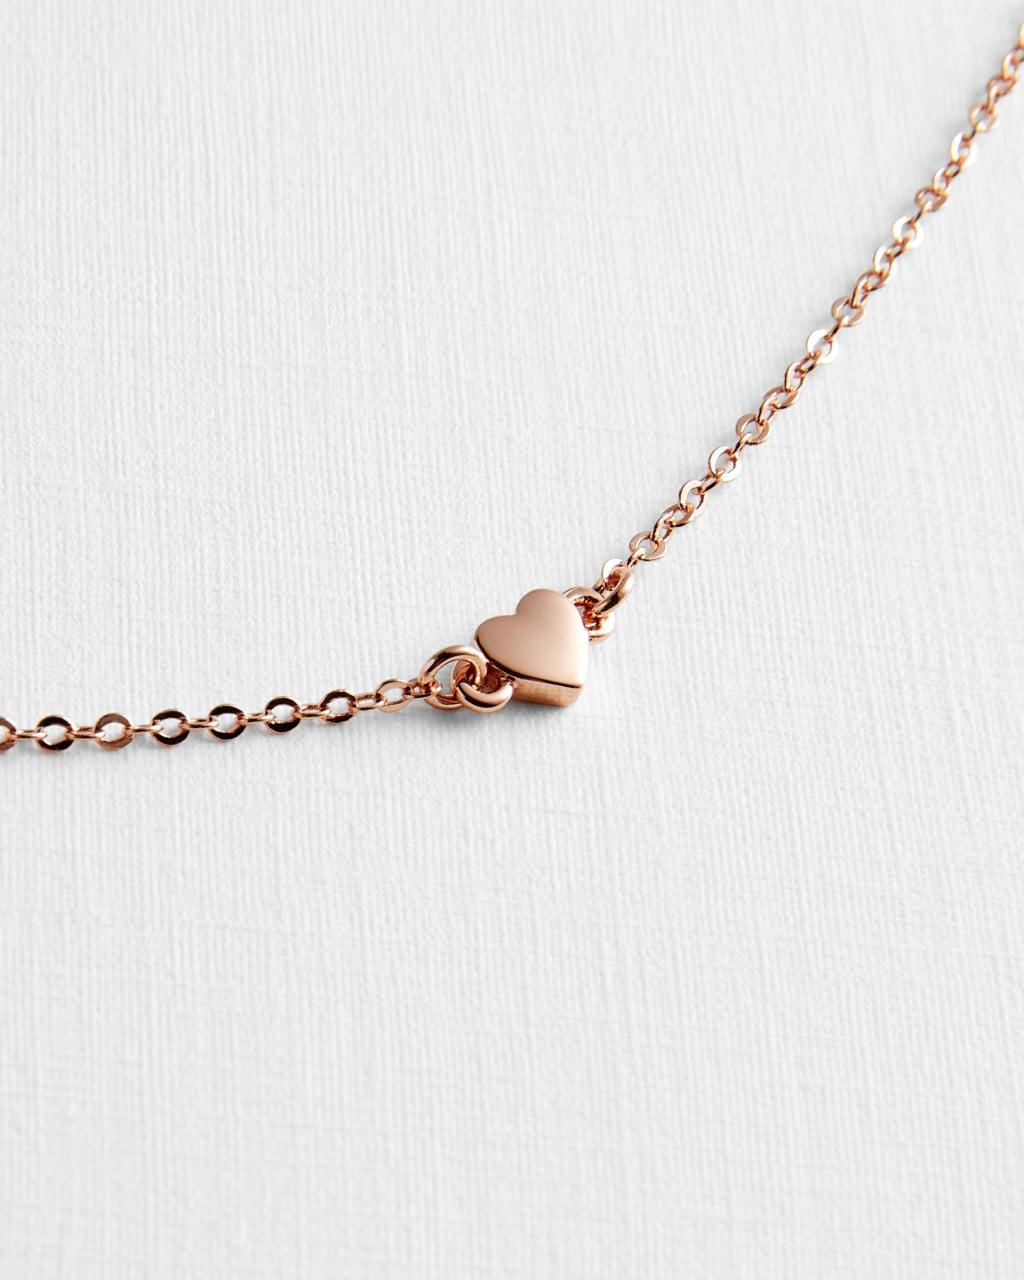 Harsaa Tiny Heart Bracelet in Rose Gold | eightywingold - official partner of Ted Baker